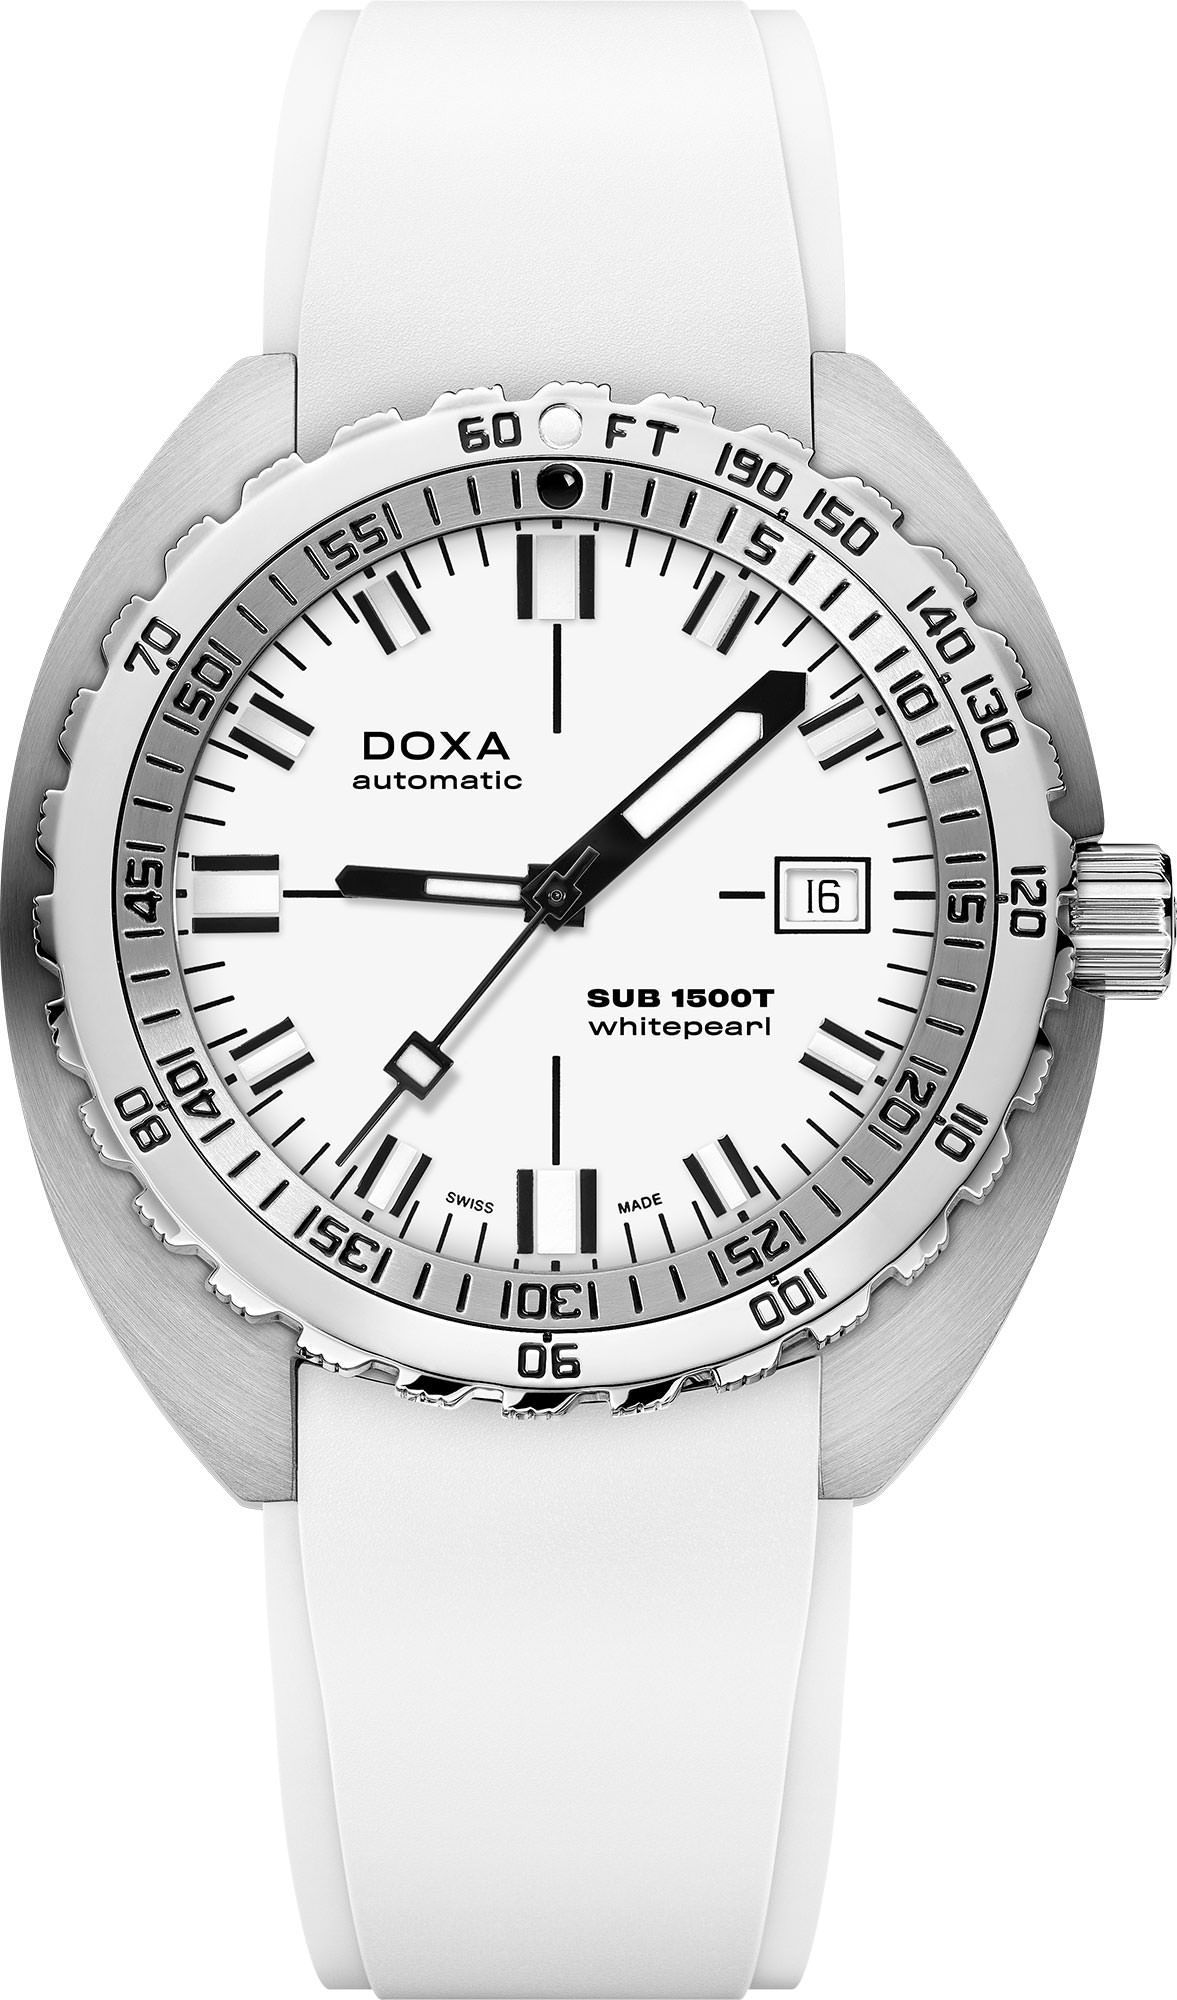 Doxa SUB 1500T Whitepearl White Dial 45 mm Automatic Watch For Men - 1